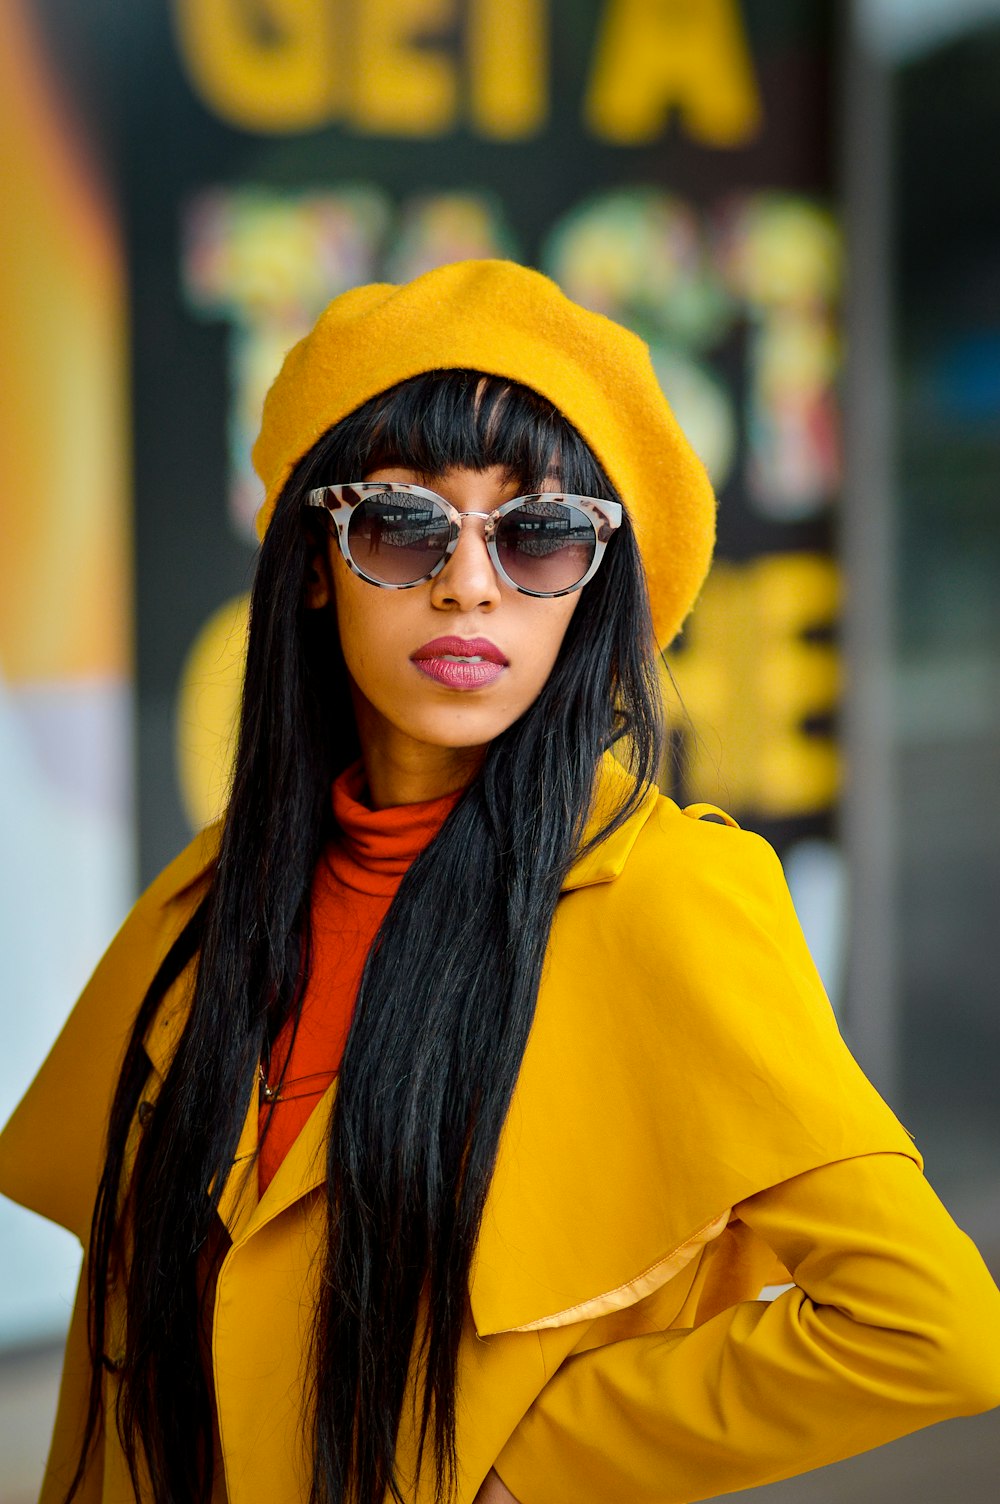 a woman wearing a yellow coat and sunglasses